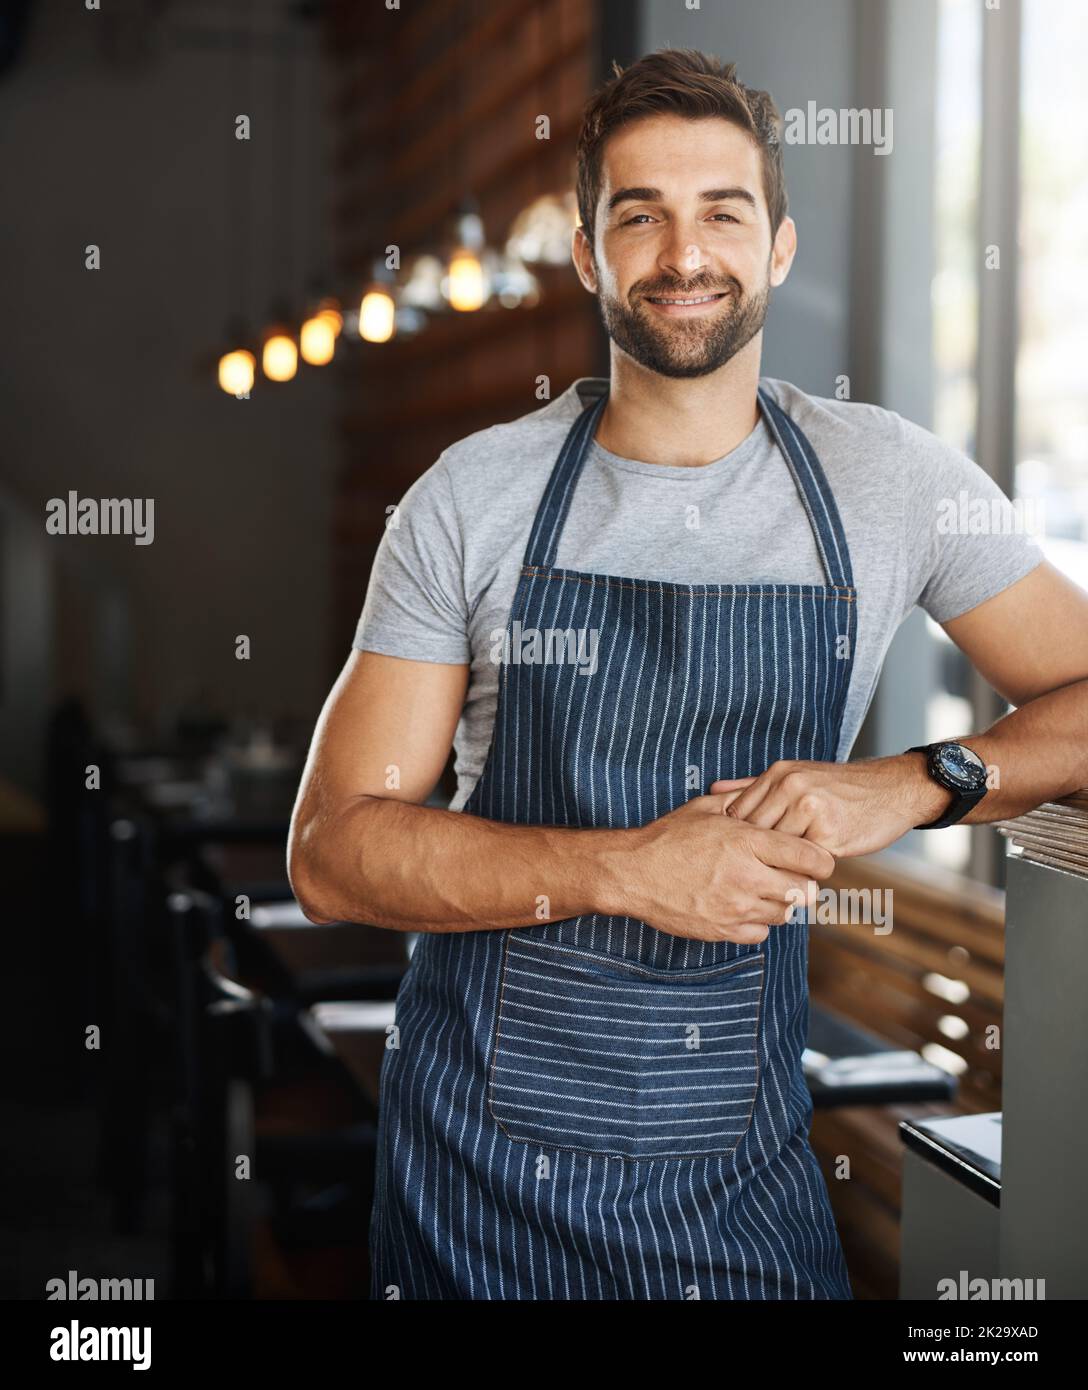 The best barista on the block. Portrait of a confident young man working in a cafe. Stock Photo